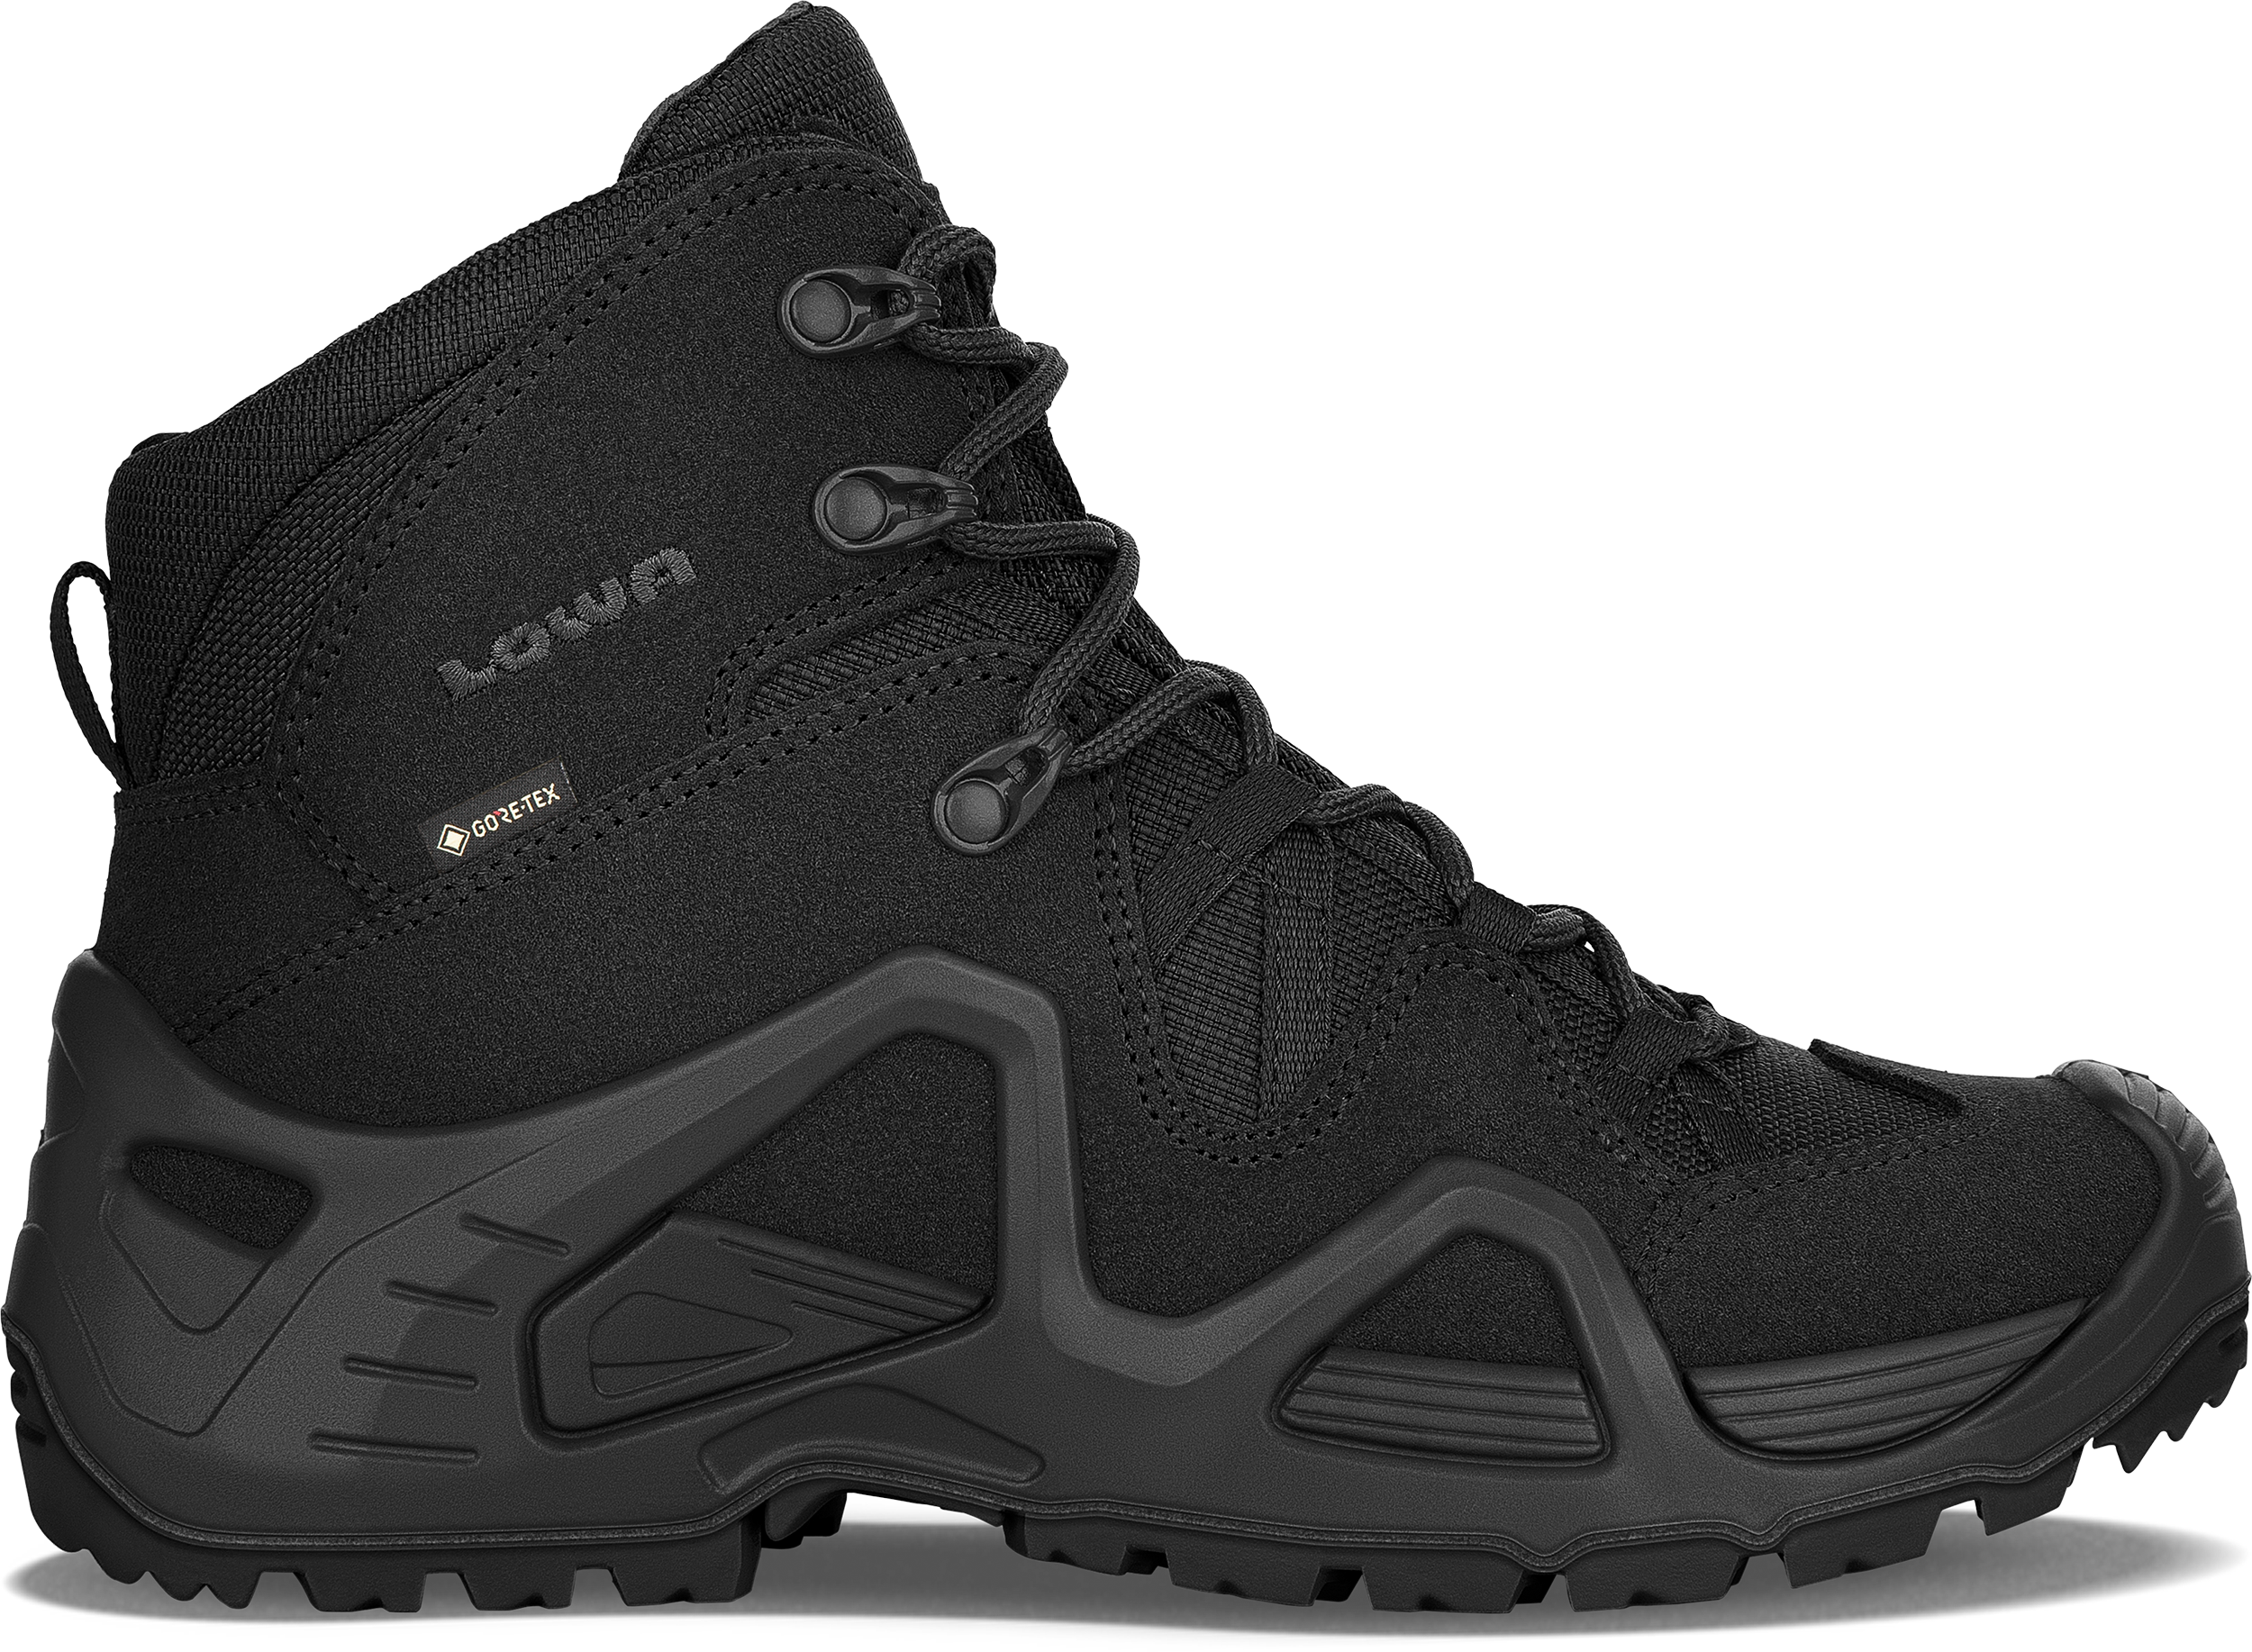 ZEPHYR GTX MID TF Ws: TASK FORCE: CLOSE-QUARTERS COMBAT Shoes for